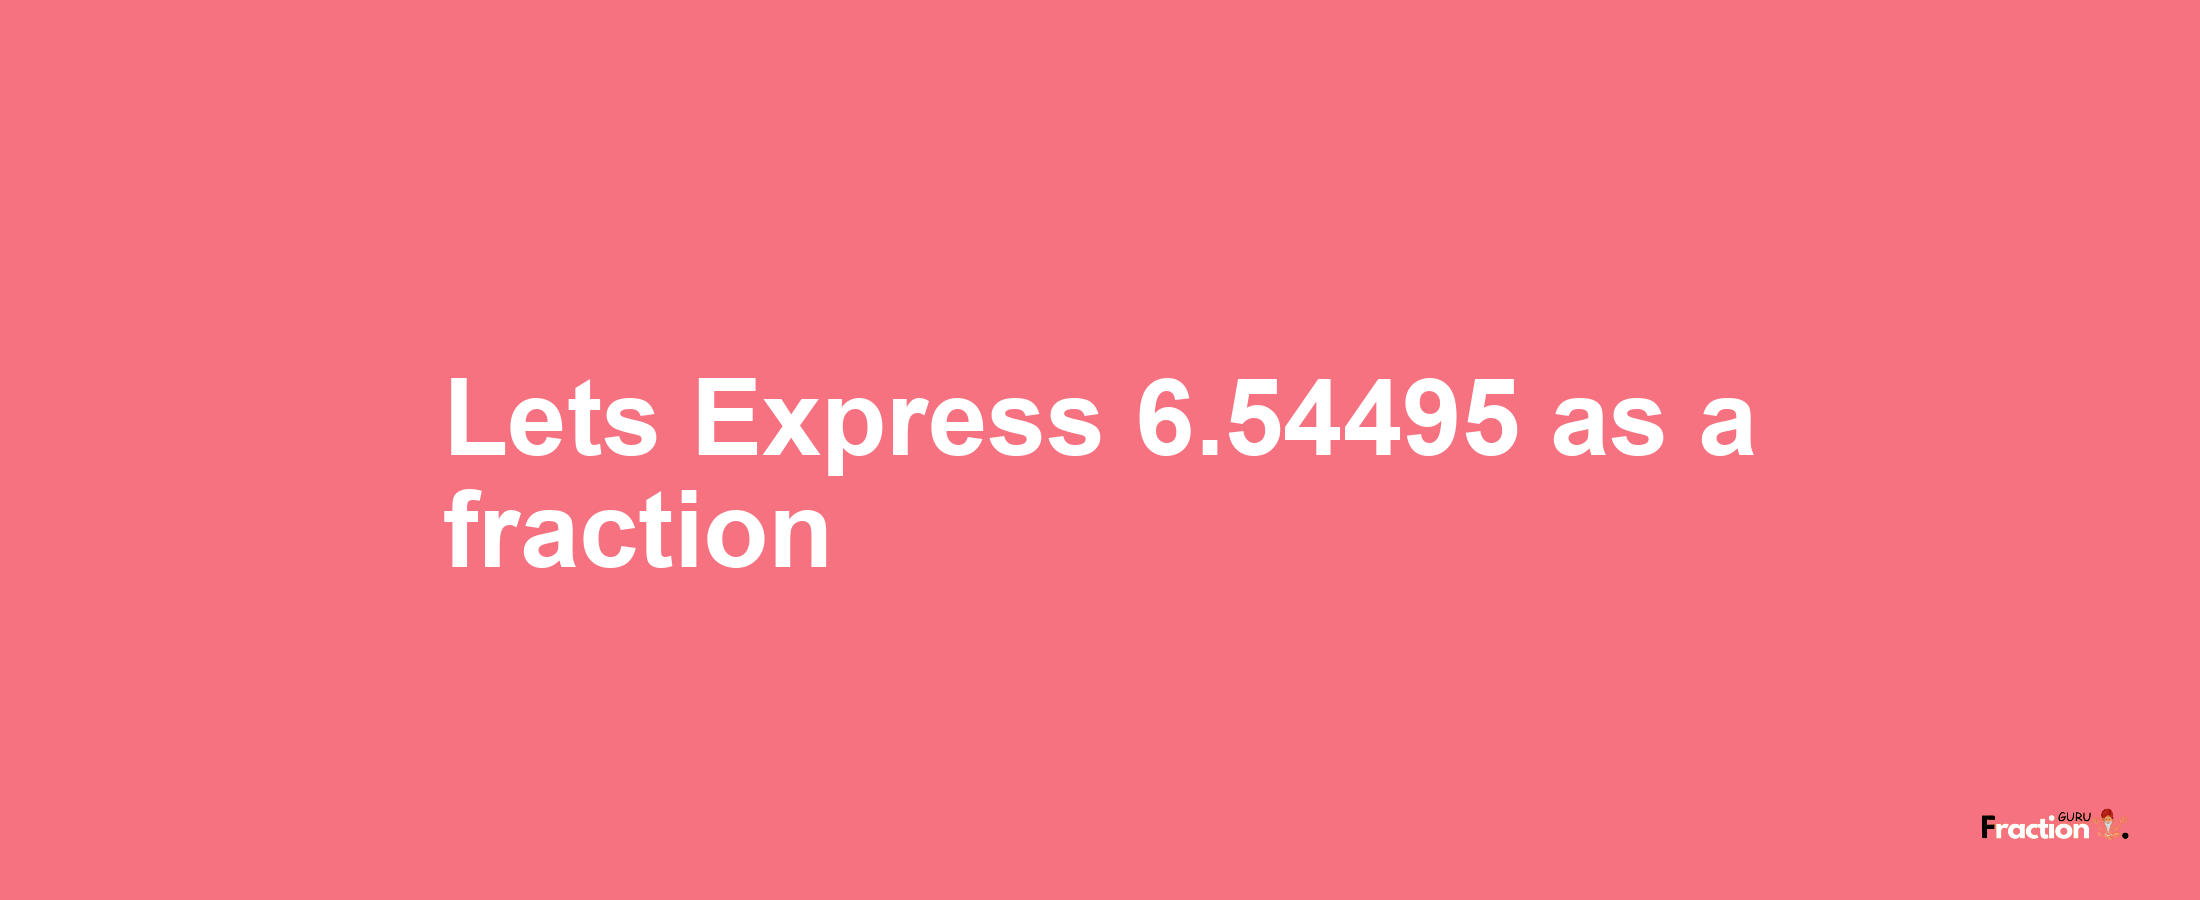 Lets Express 6.54495 as afraction